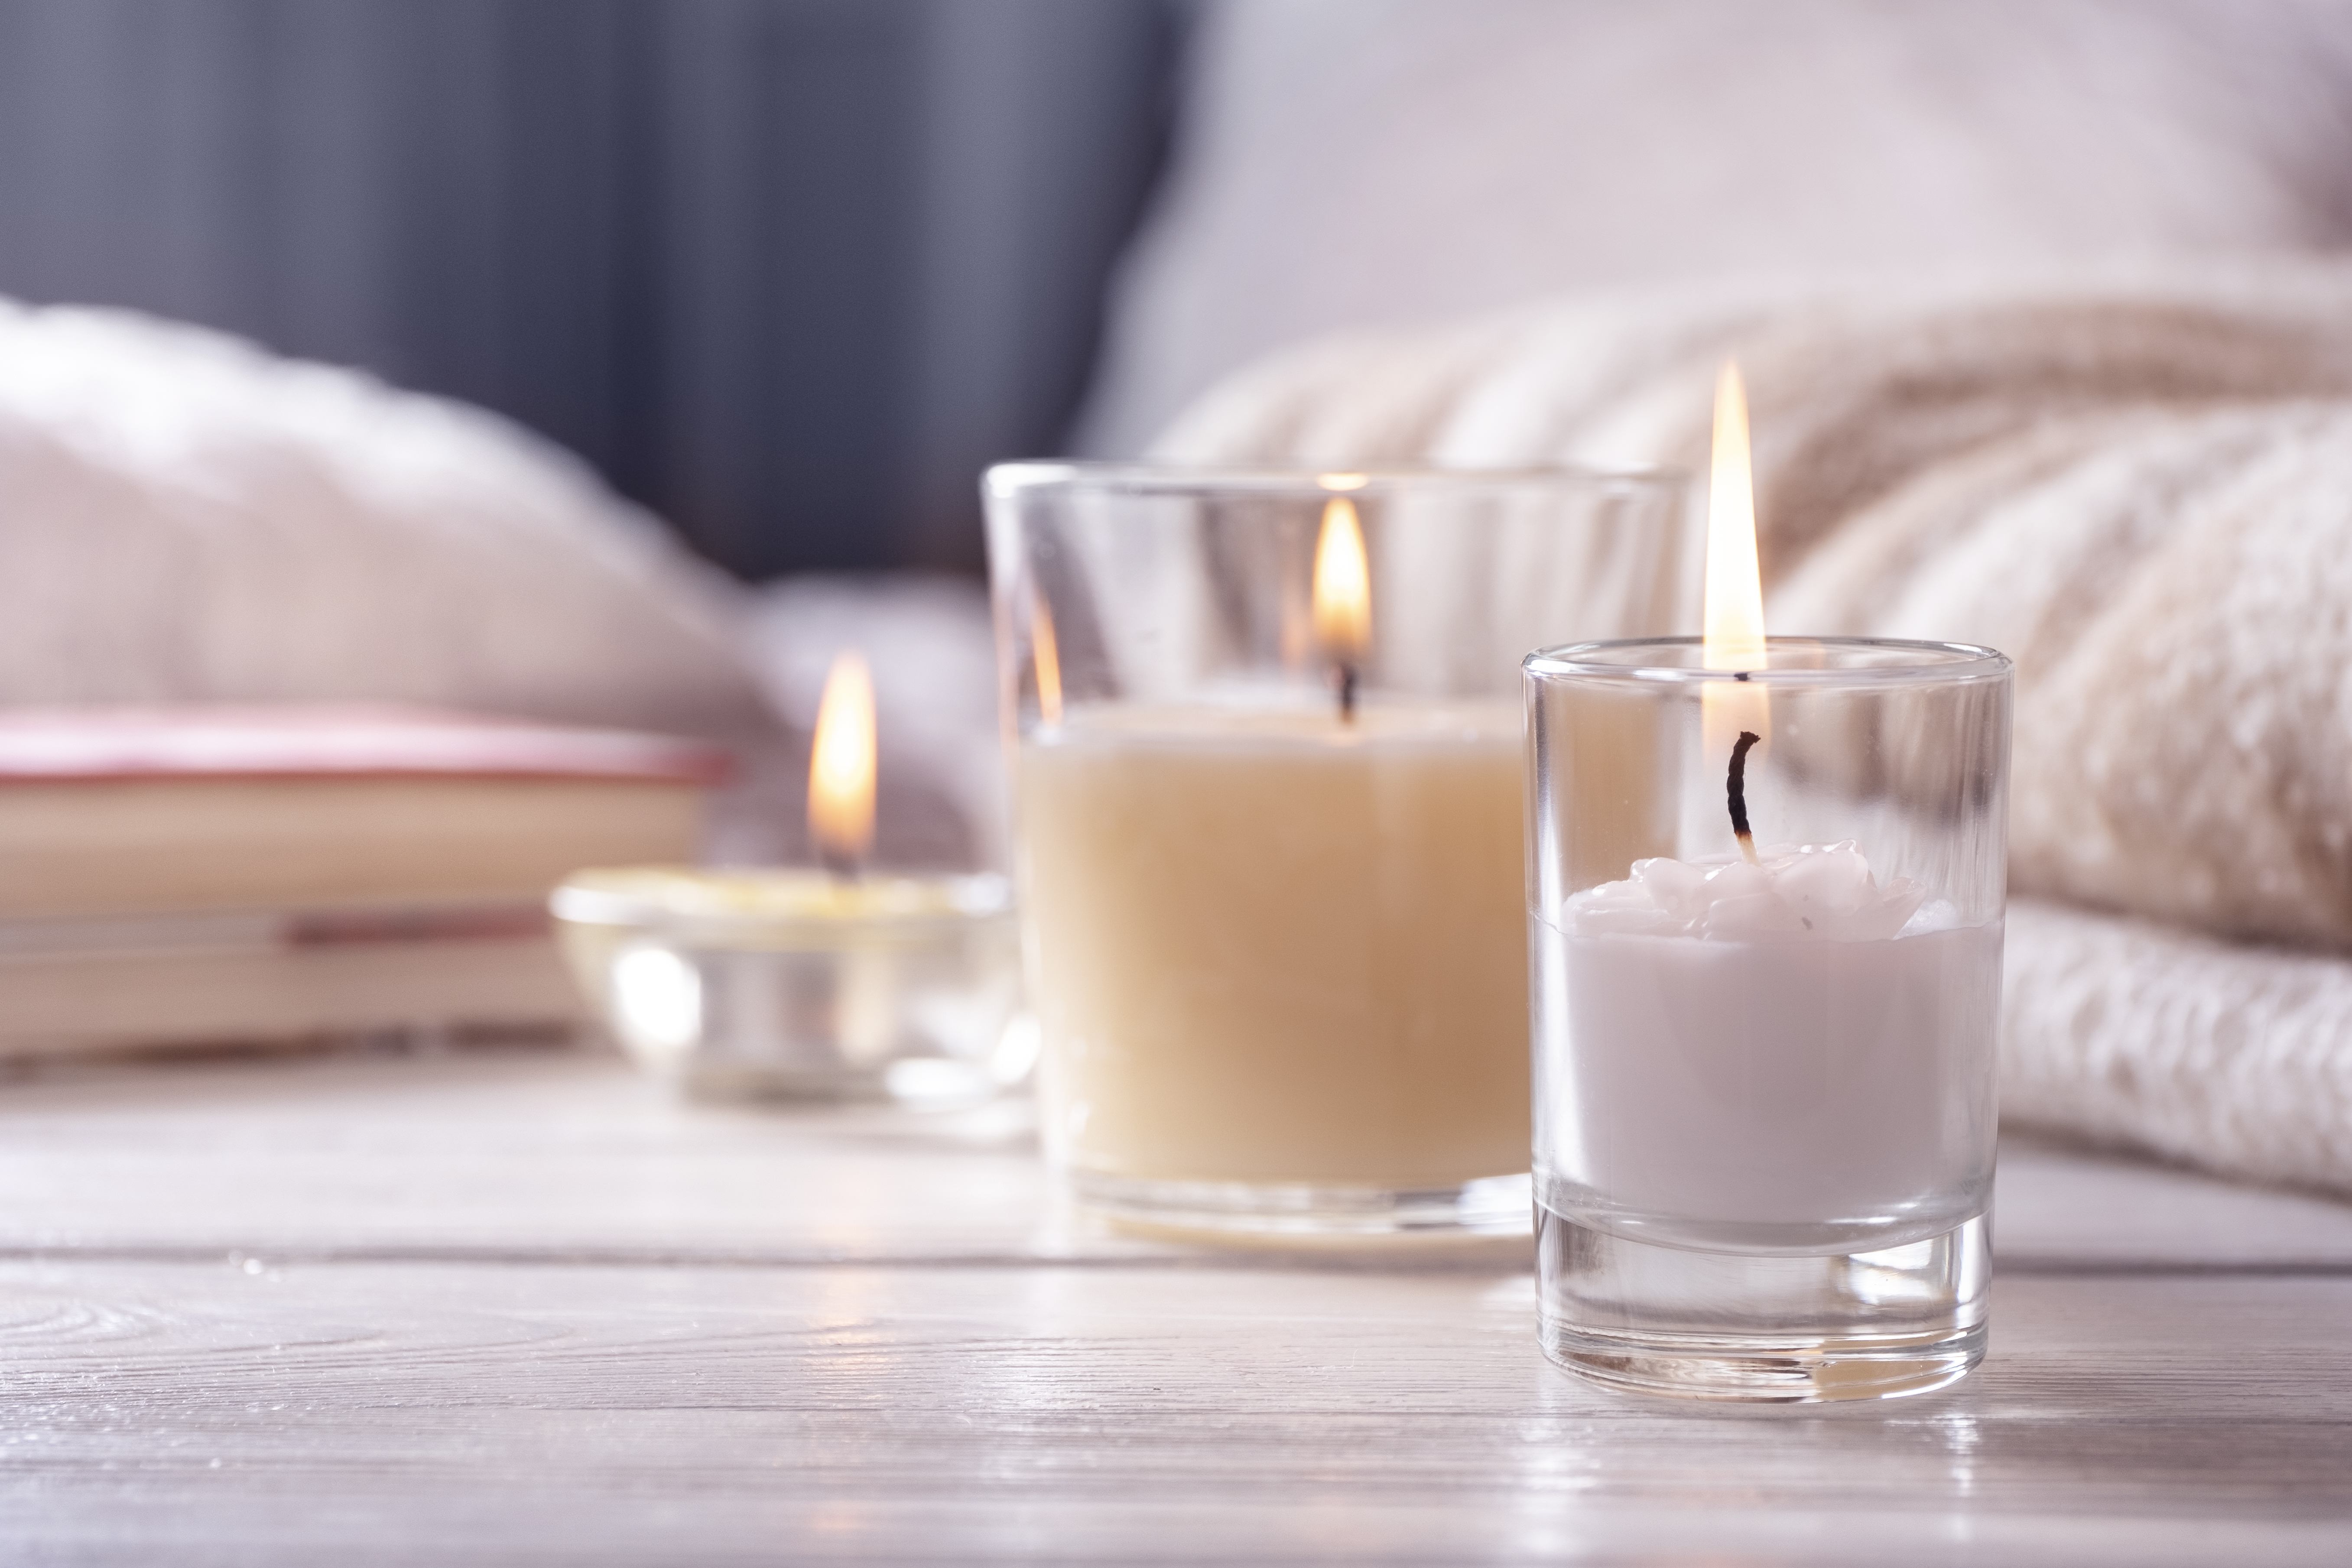 Wooden wicks and cotton wick candle for scented candles